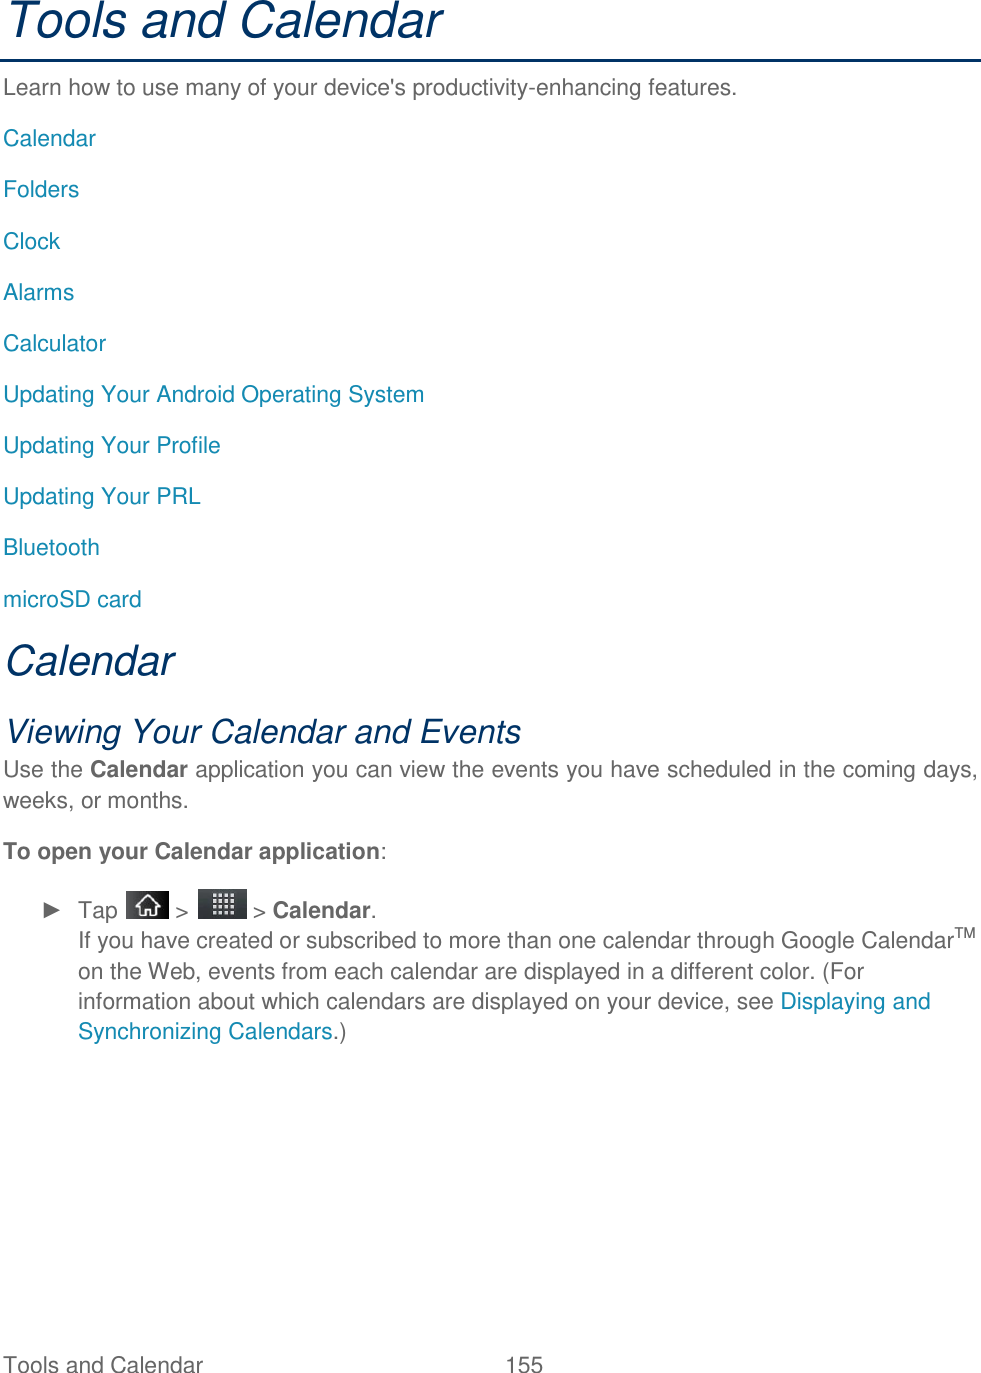 Tools and Calendar  155 Tools and Calendar Learn how to use many of your device&apos;s productivity-enhancing features. Calendar  Folders Clock Alarms Calculator Updating Your Android Operating System Updating Your Profile Updating Your PRL  Bluetooth microSD card Calendar Viewing Your Calendar and Events Use the Calendar application you can view the events you have scheduled in the coming days, weeks, or months. To open your Calendar application: ►  Tap   &gt;   &gt; Calendar. If you have created or subscribed to more than one calendar through Google CalendarTM on the Web, events from each calendar are displayed in a different color. (For information about which calendars are displayed on your device, see Displaying and Synchronizing Calendars.) 